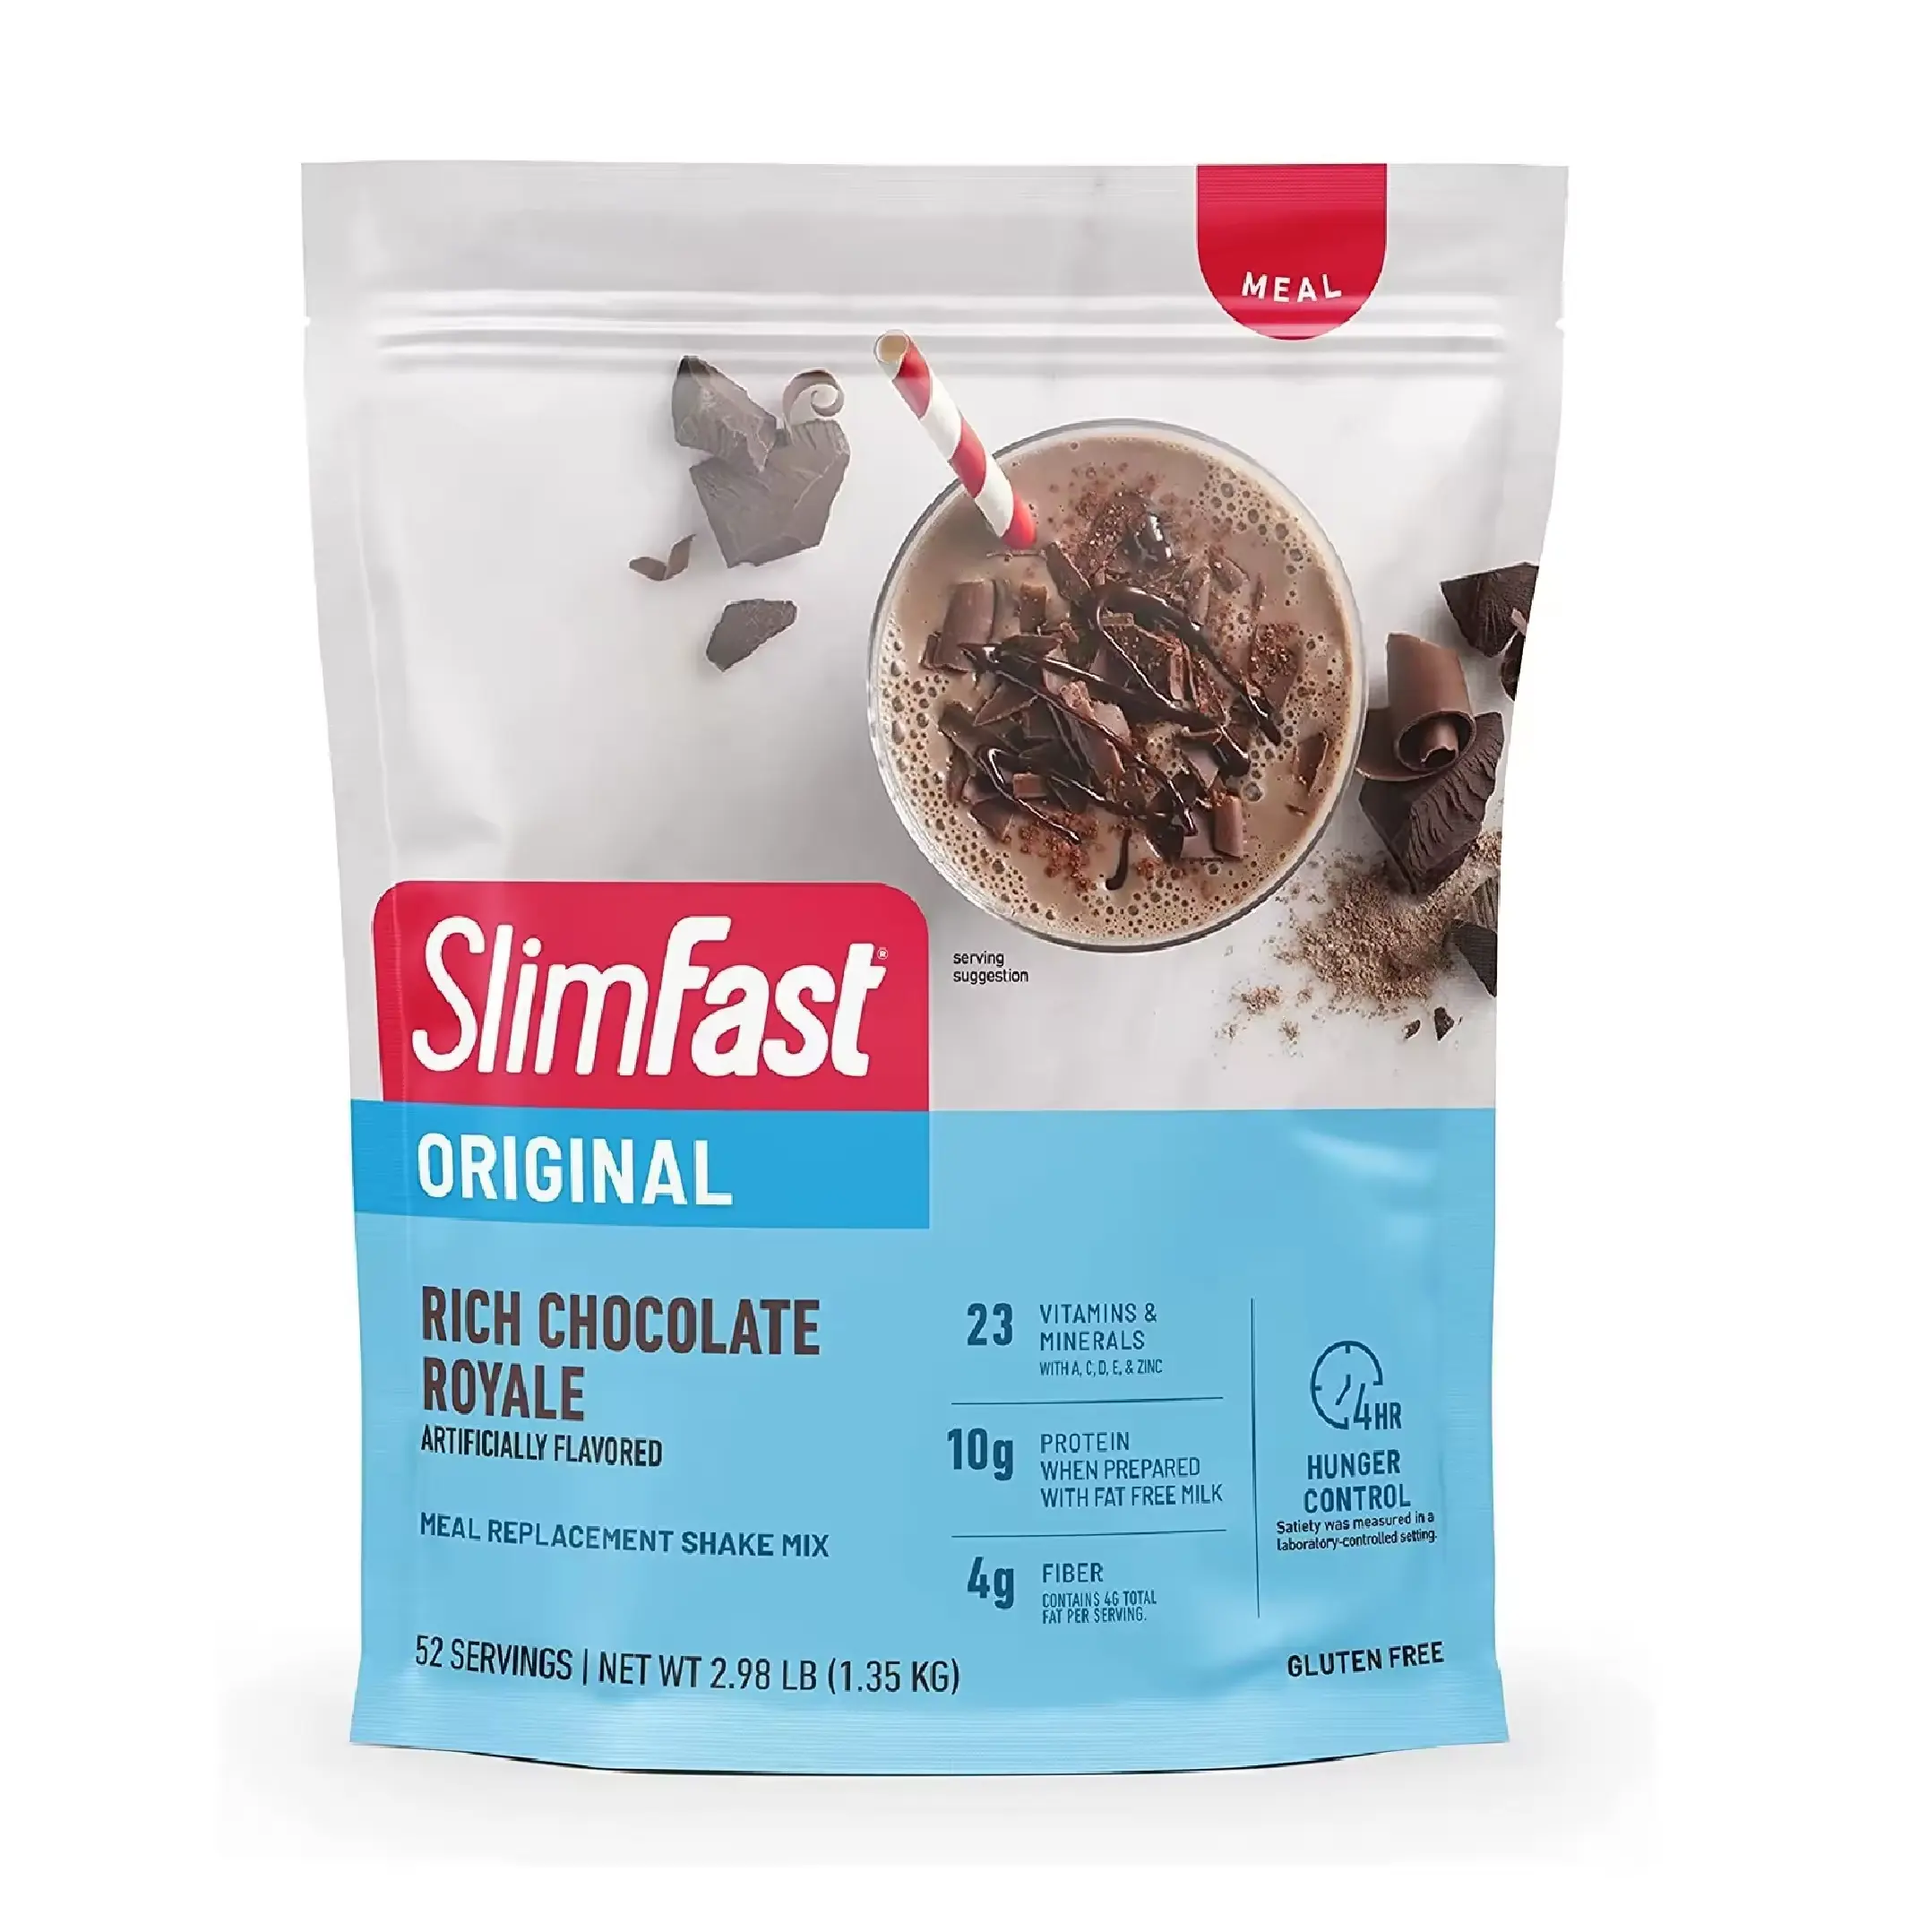 OEM Slimming Instant Meal Replacement protein shake powder contains 24 nutrients to suppress hunger and promote digestion